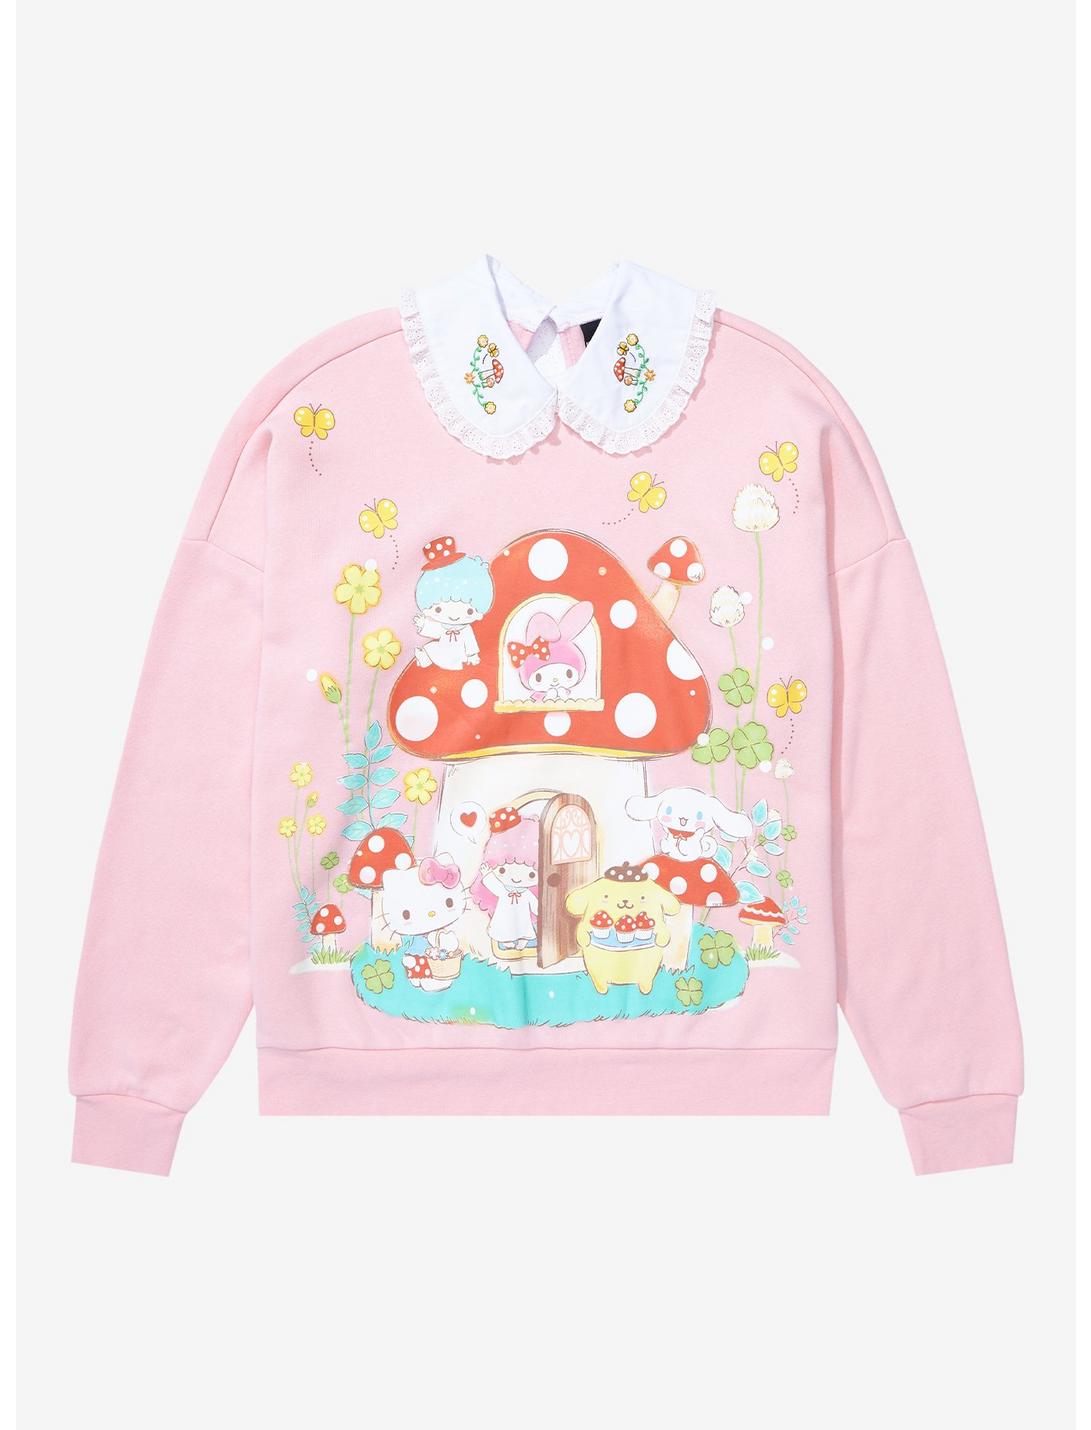 Sanrio Hello Kitty and Friends Mushroom Women's Plus Size Collared Crewneck - BoxLunch Exclusive, LIGHT PINK, hi-res